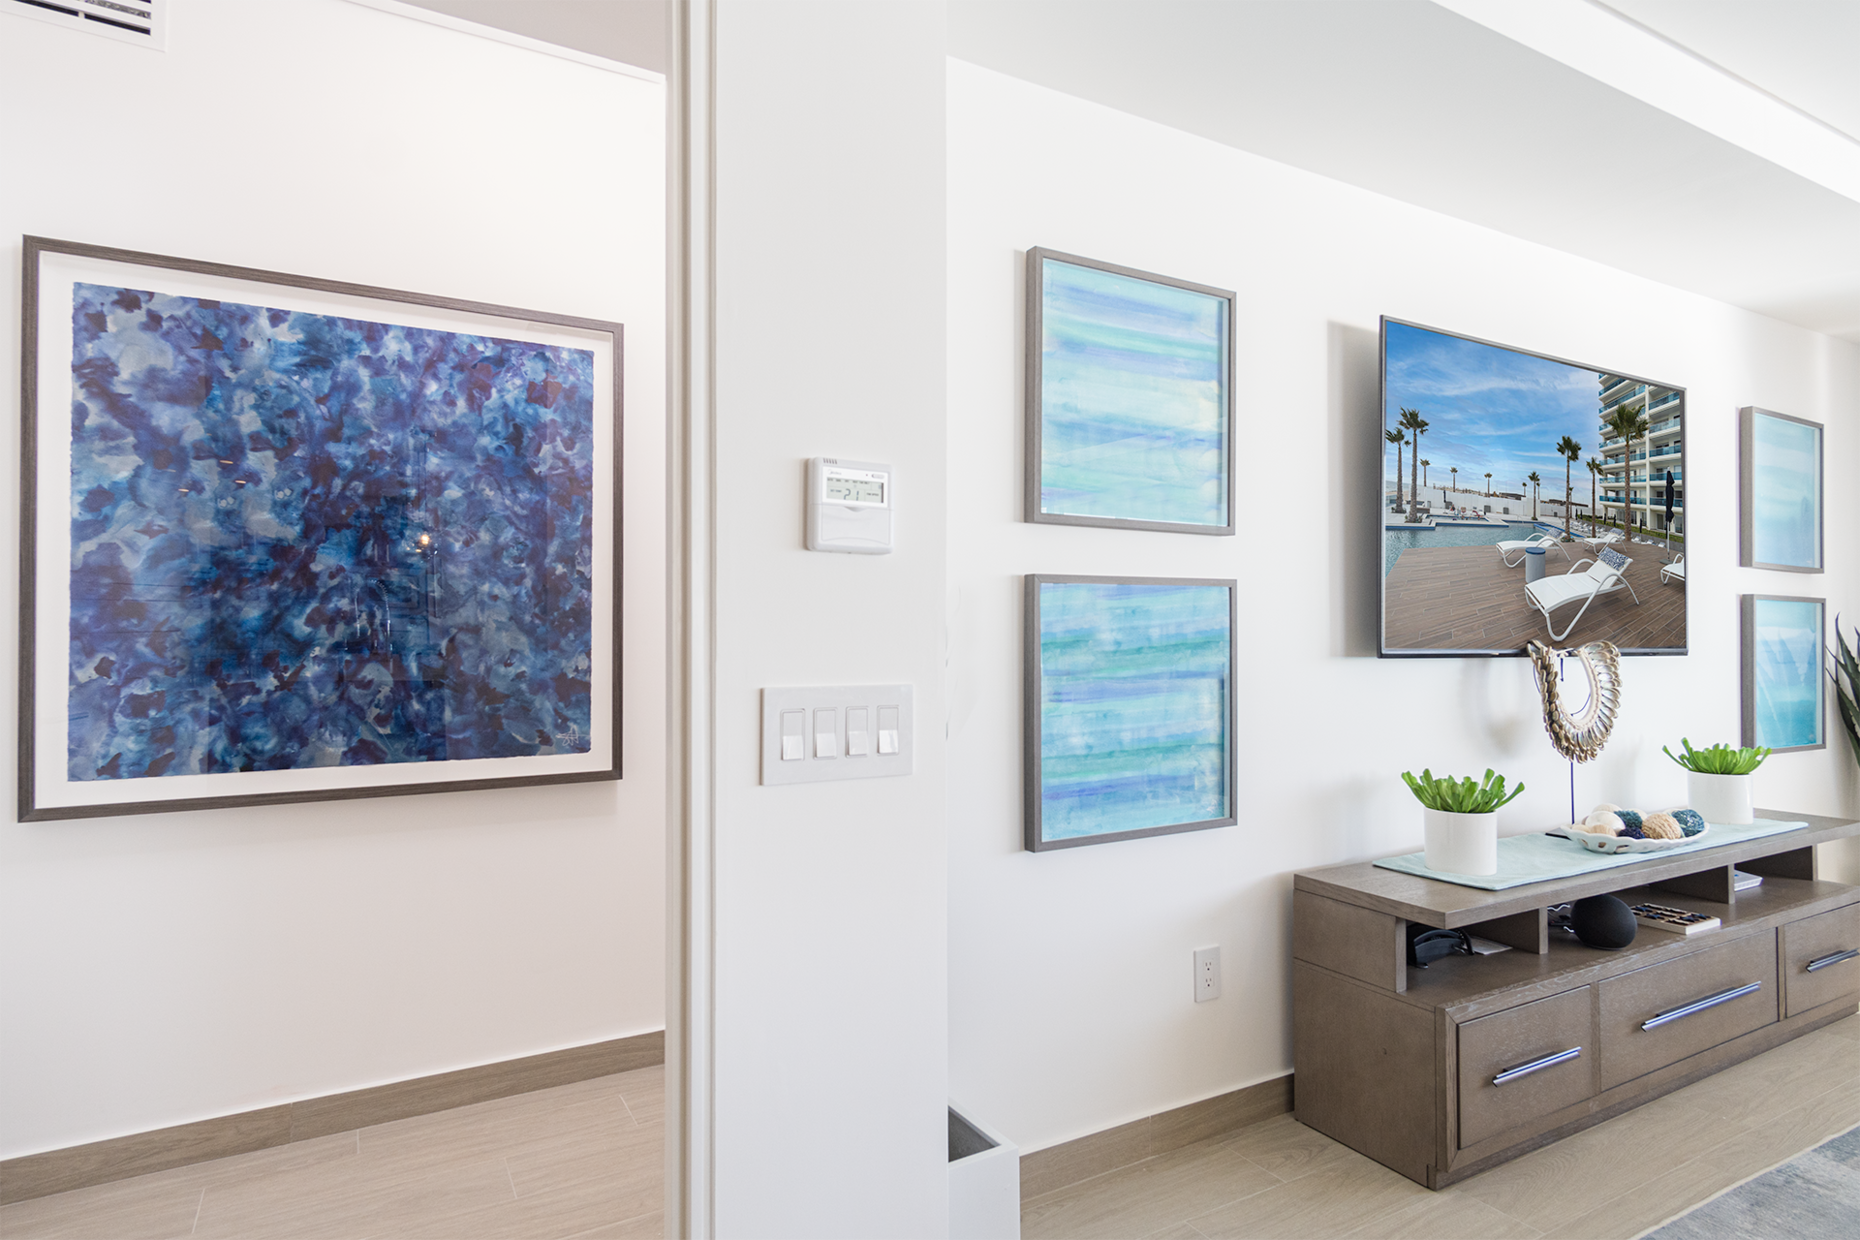 THis condominium is set apart by its custom art work throughout.